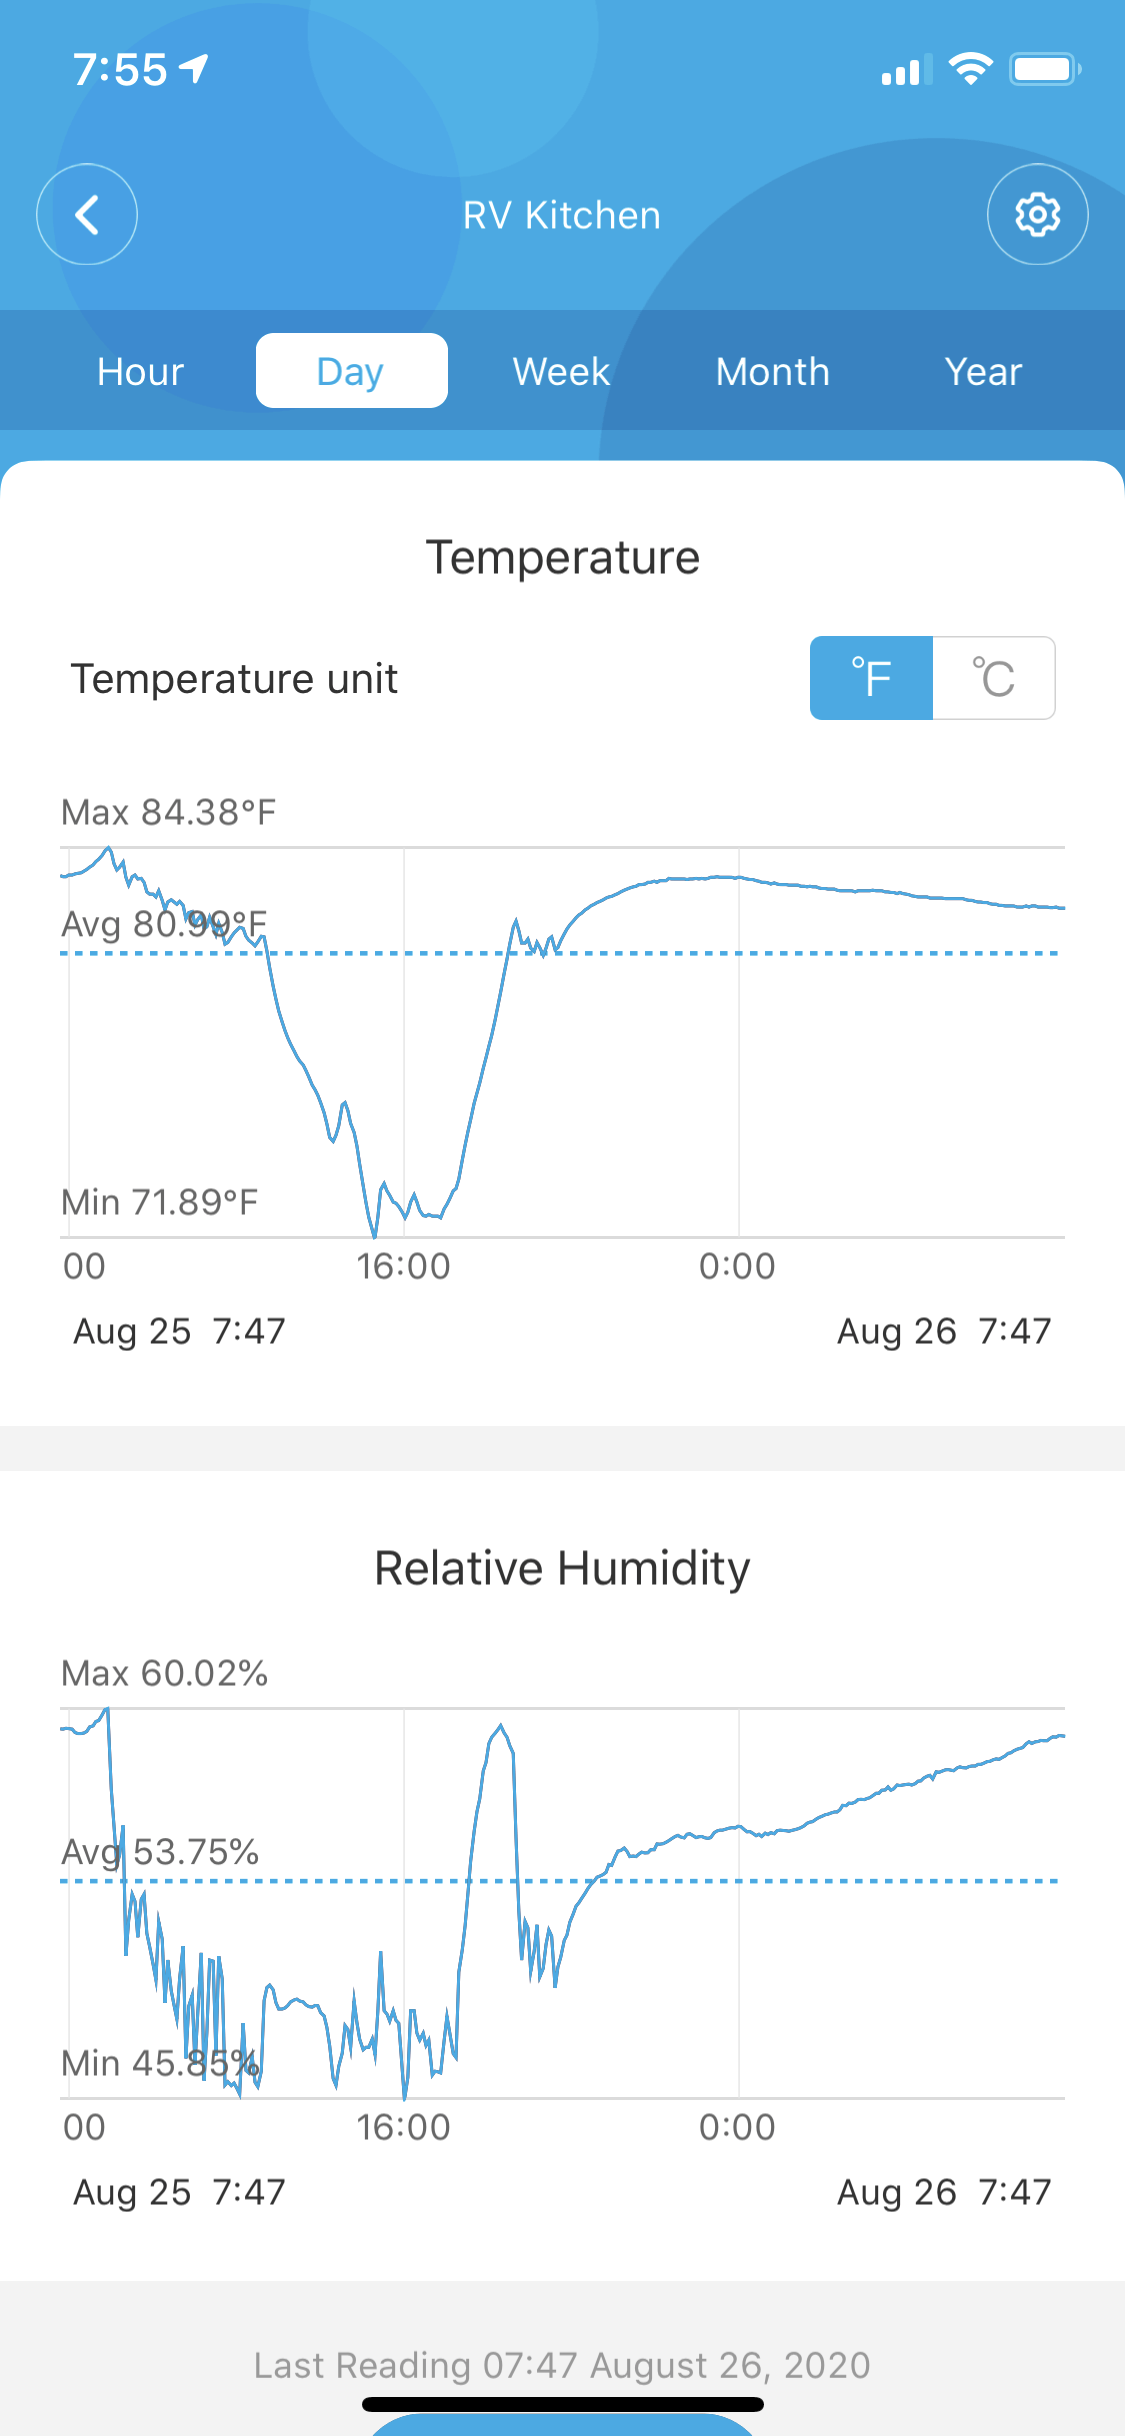 H5051 WiFi Thermometer/Hygrometer loses WiFi settings every few